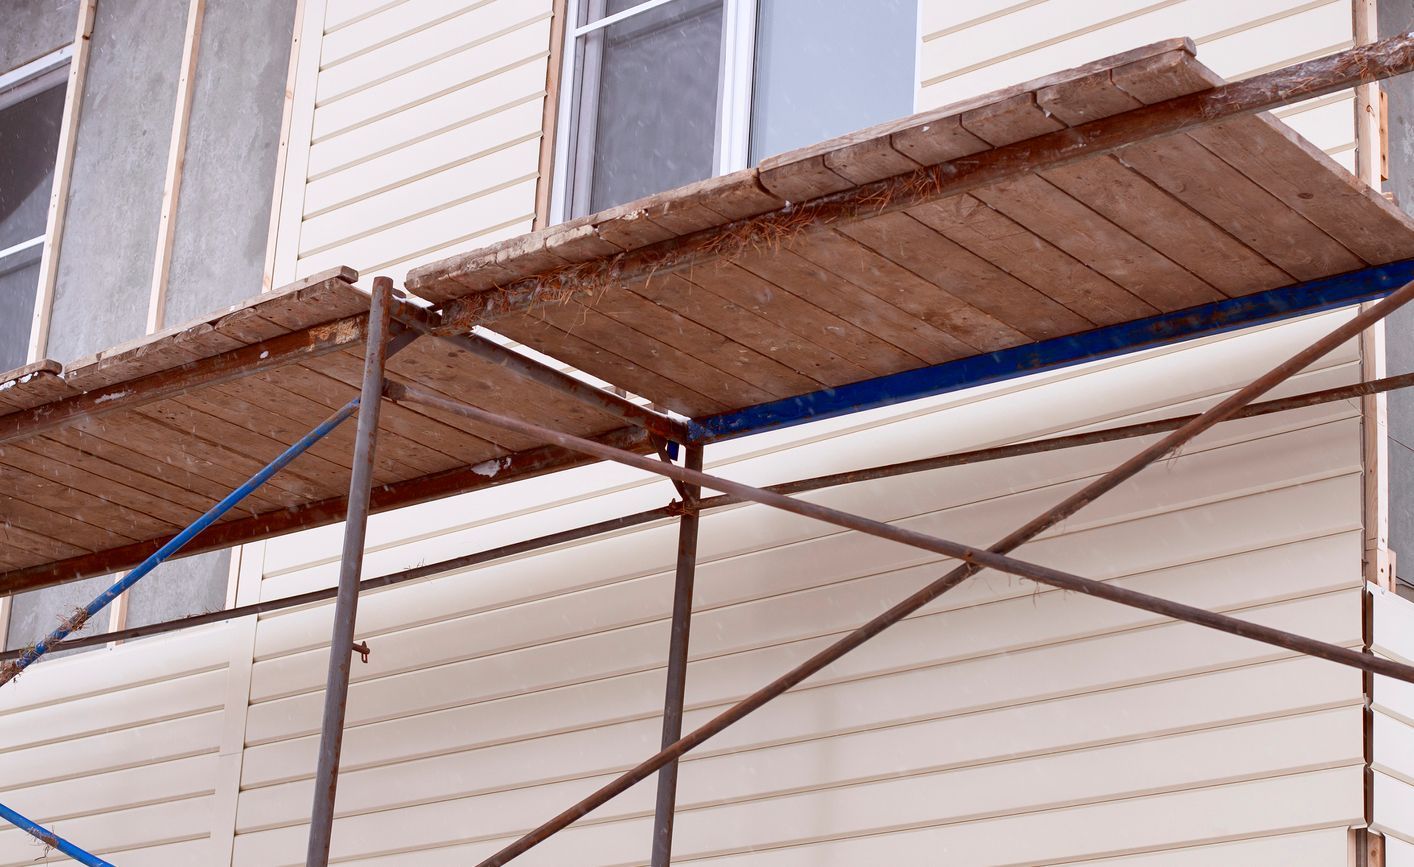 Scaffolding For Home Side Repairs - Papillion, NE - Siefken Contracting